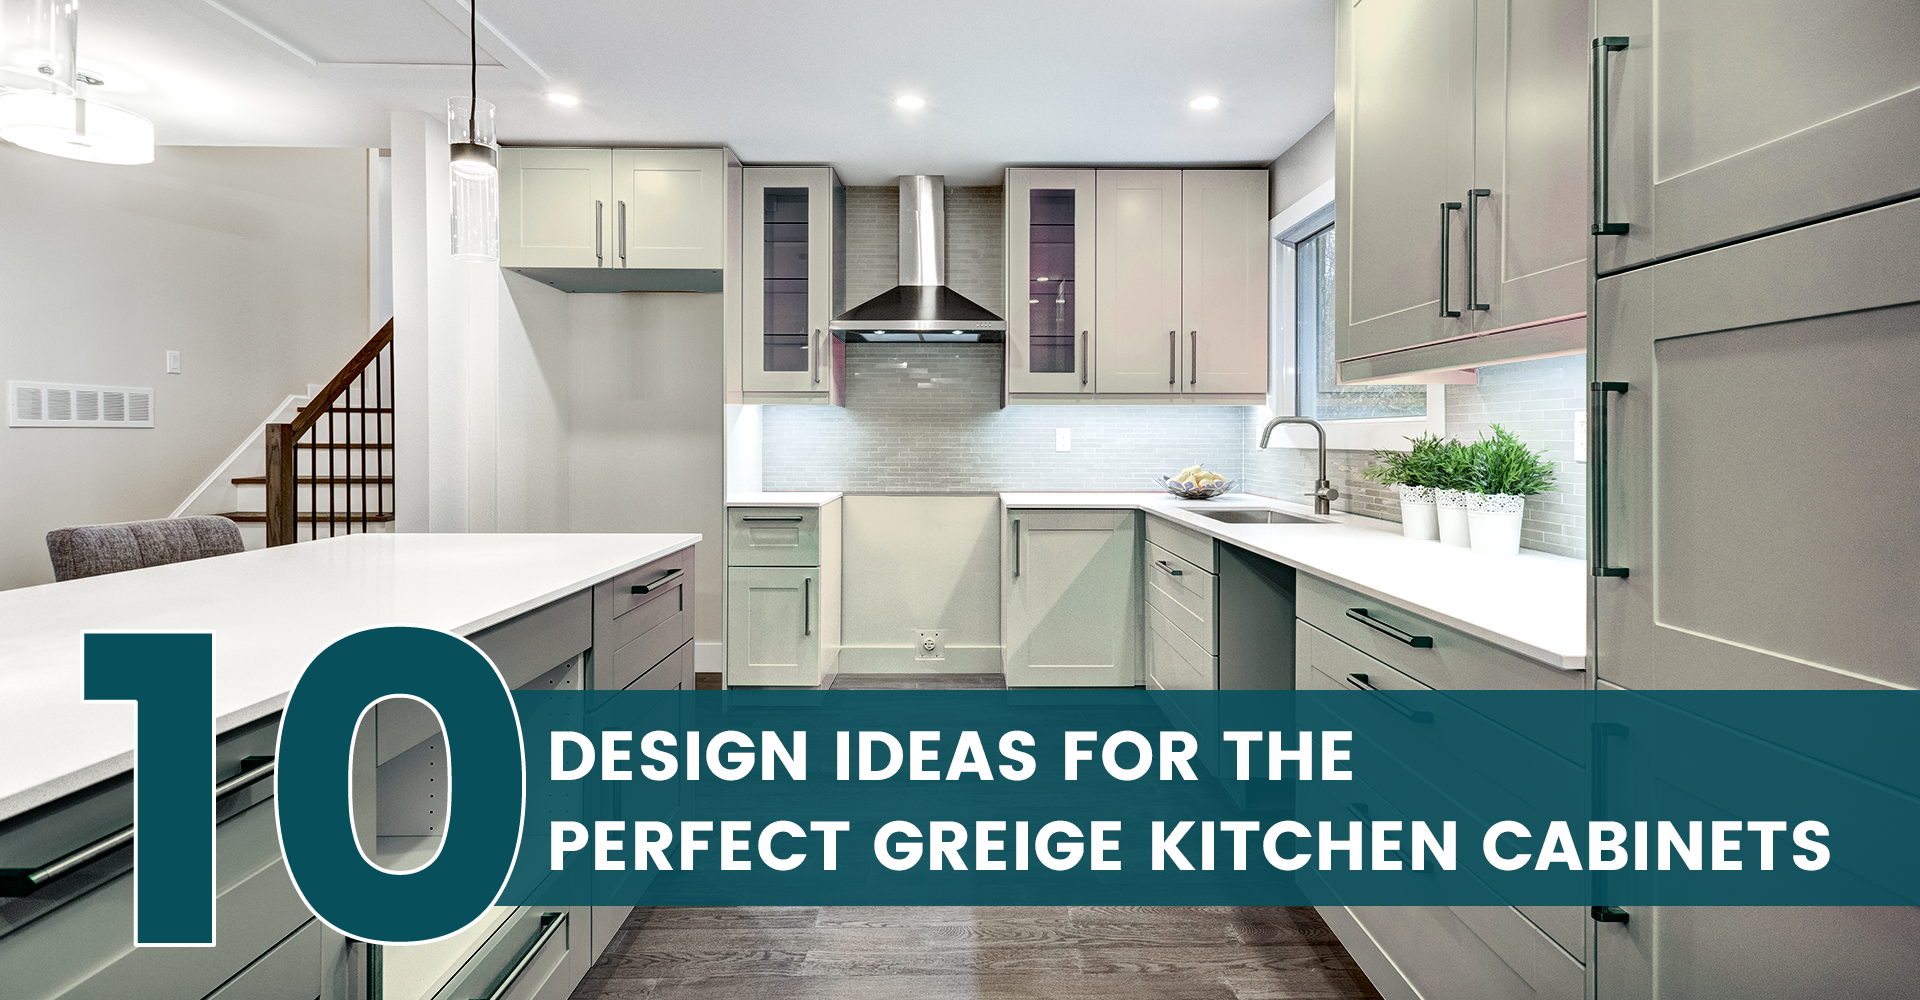 10 Design Ideas for the Perfect Greige Kitchen Cabinets